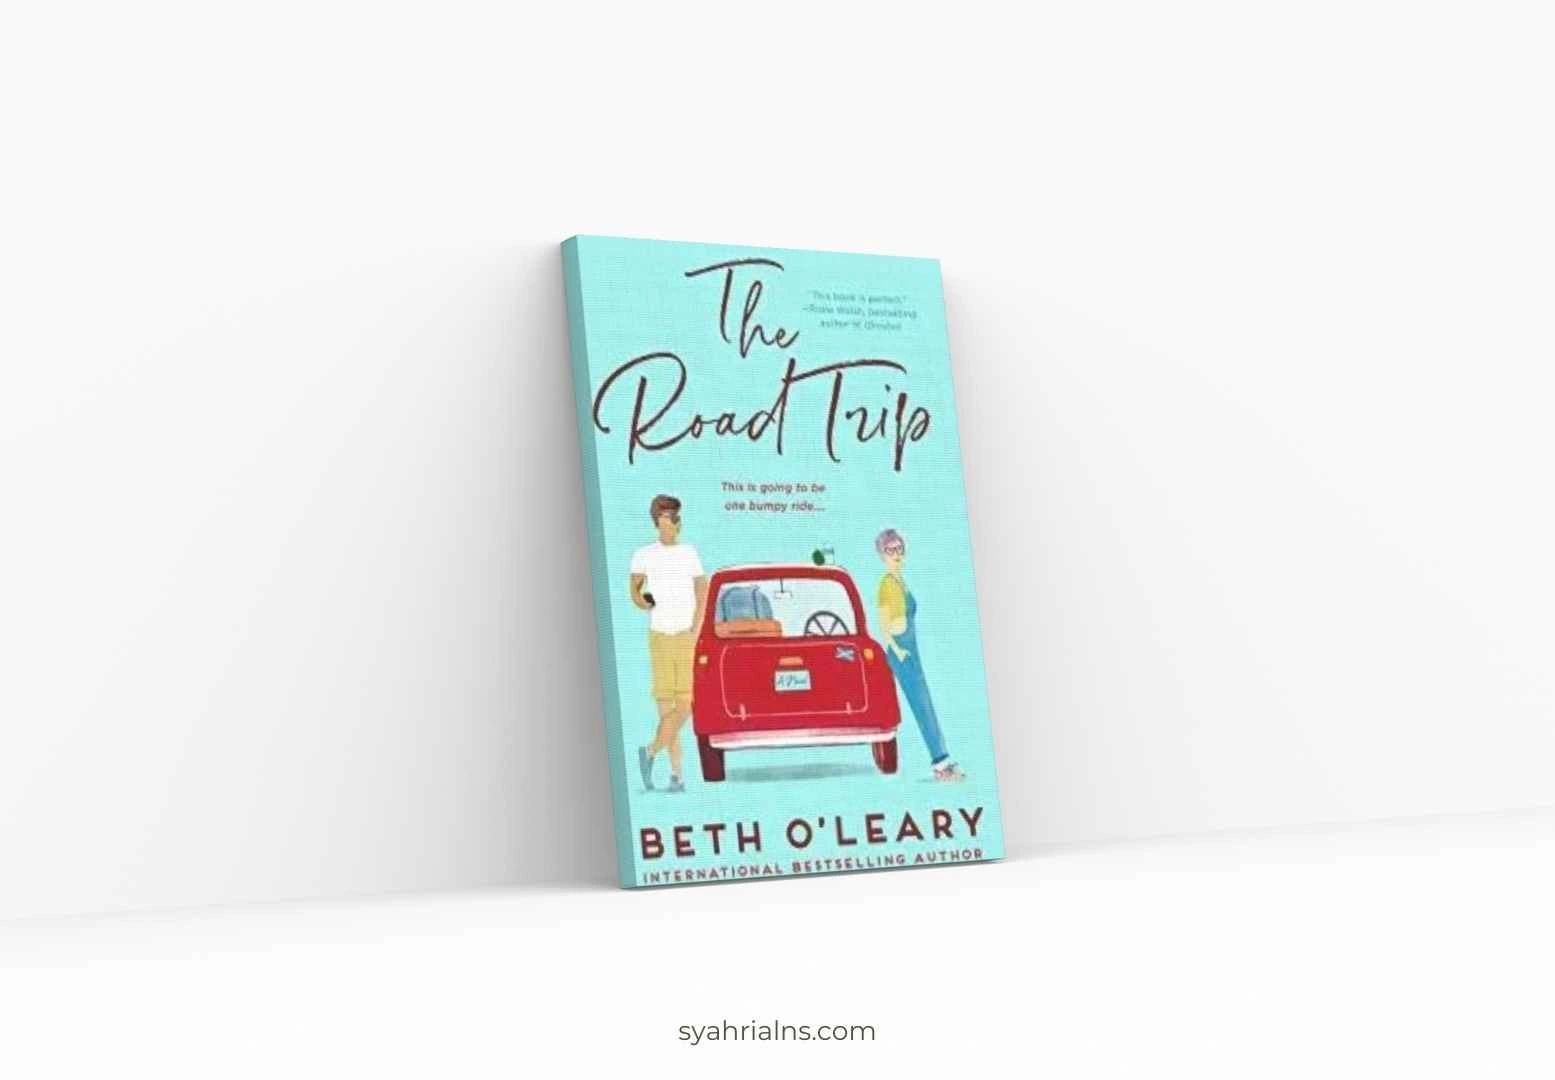 9. Books Like People We Meet on Vacation - The Road Trip by Beth O’Leary